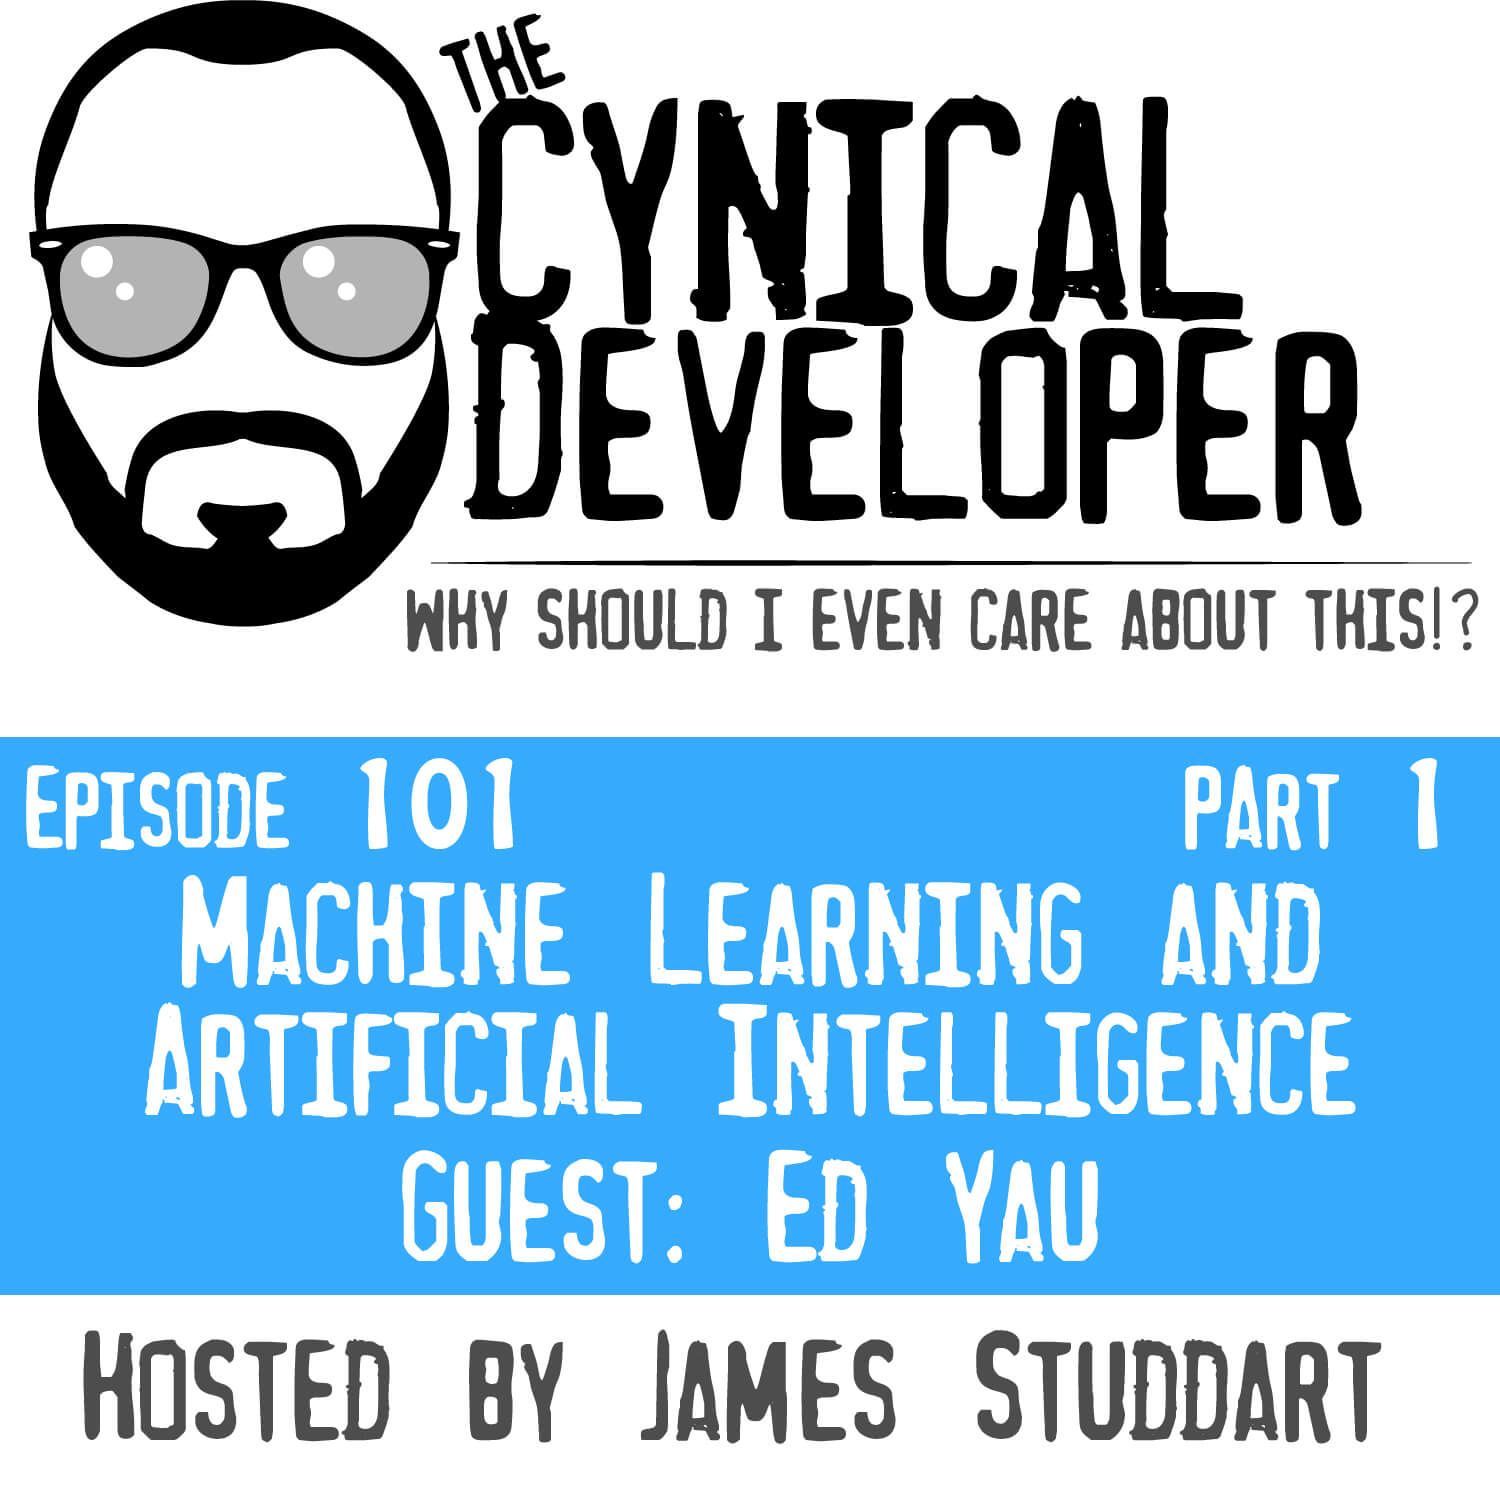 Episode 101 - Machine Learning and Artificial Intelligence (Part 1)